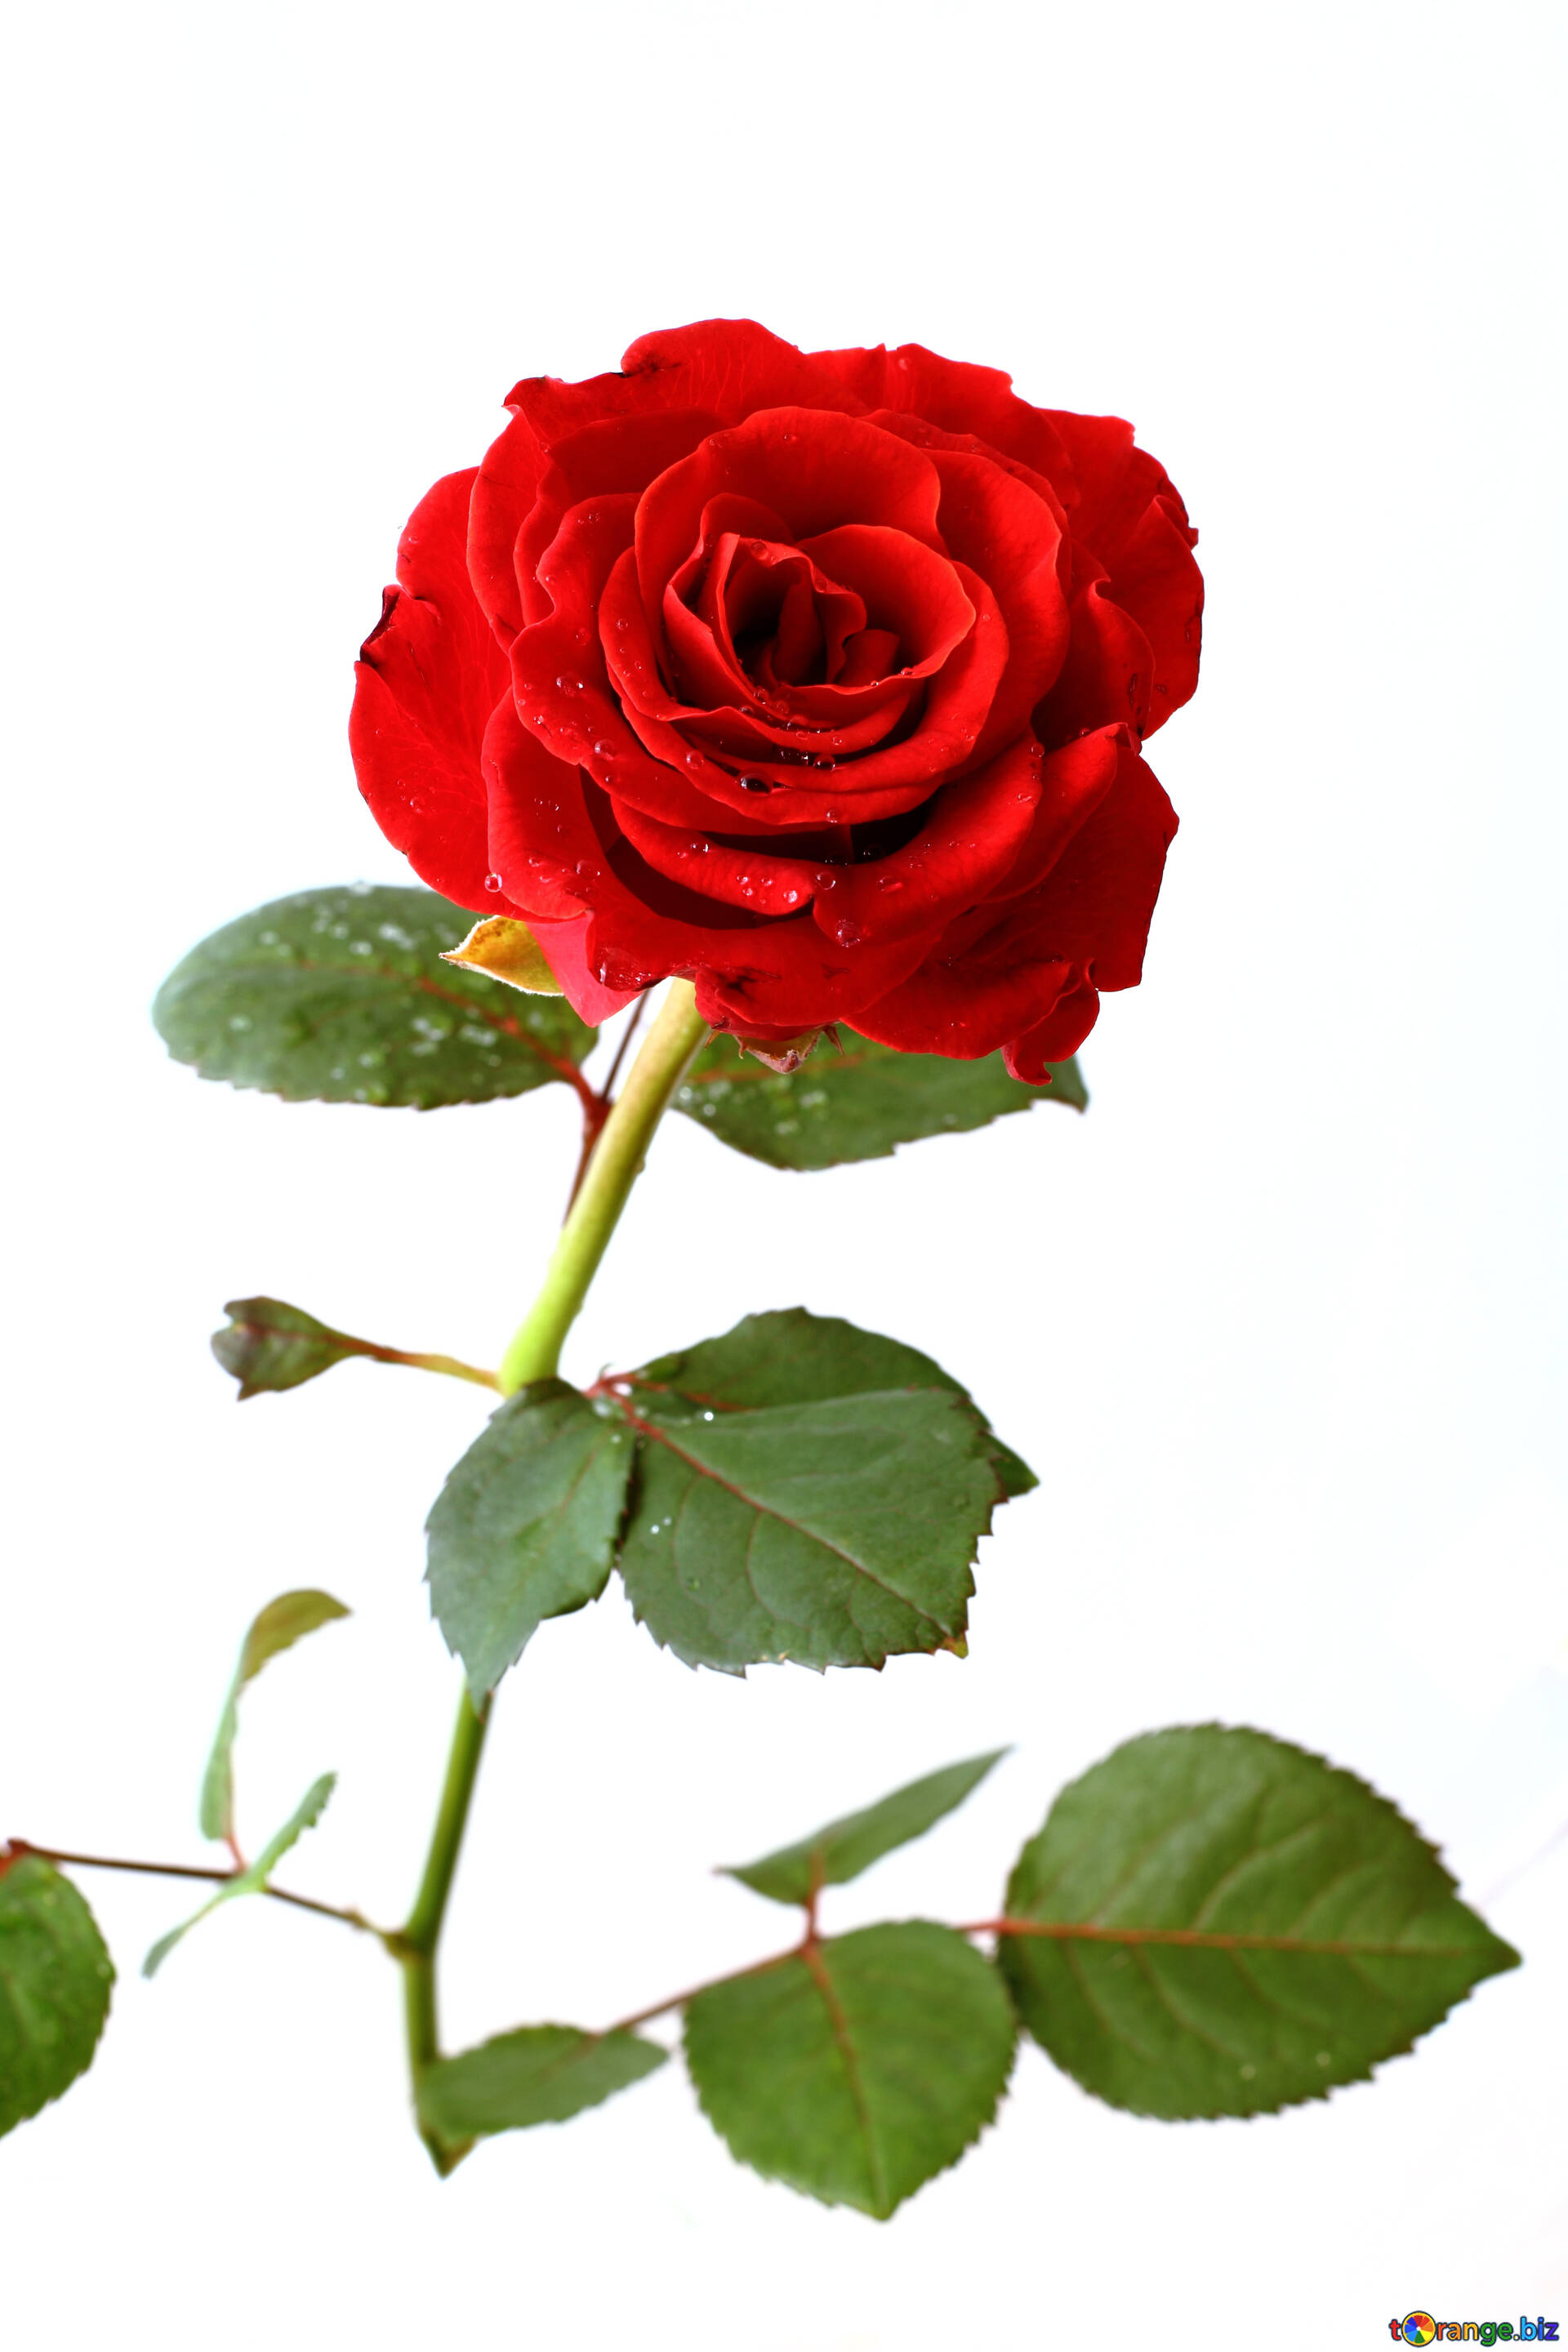 Red Rose White Background Discount Deals, Save 46% | jlcatj.gob.mx